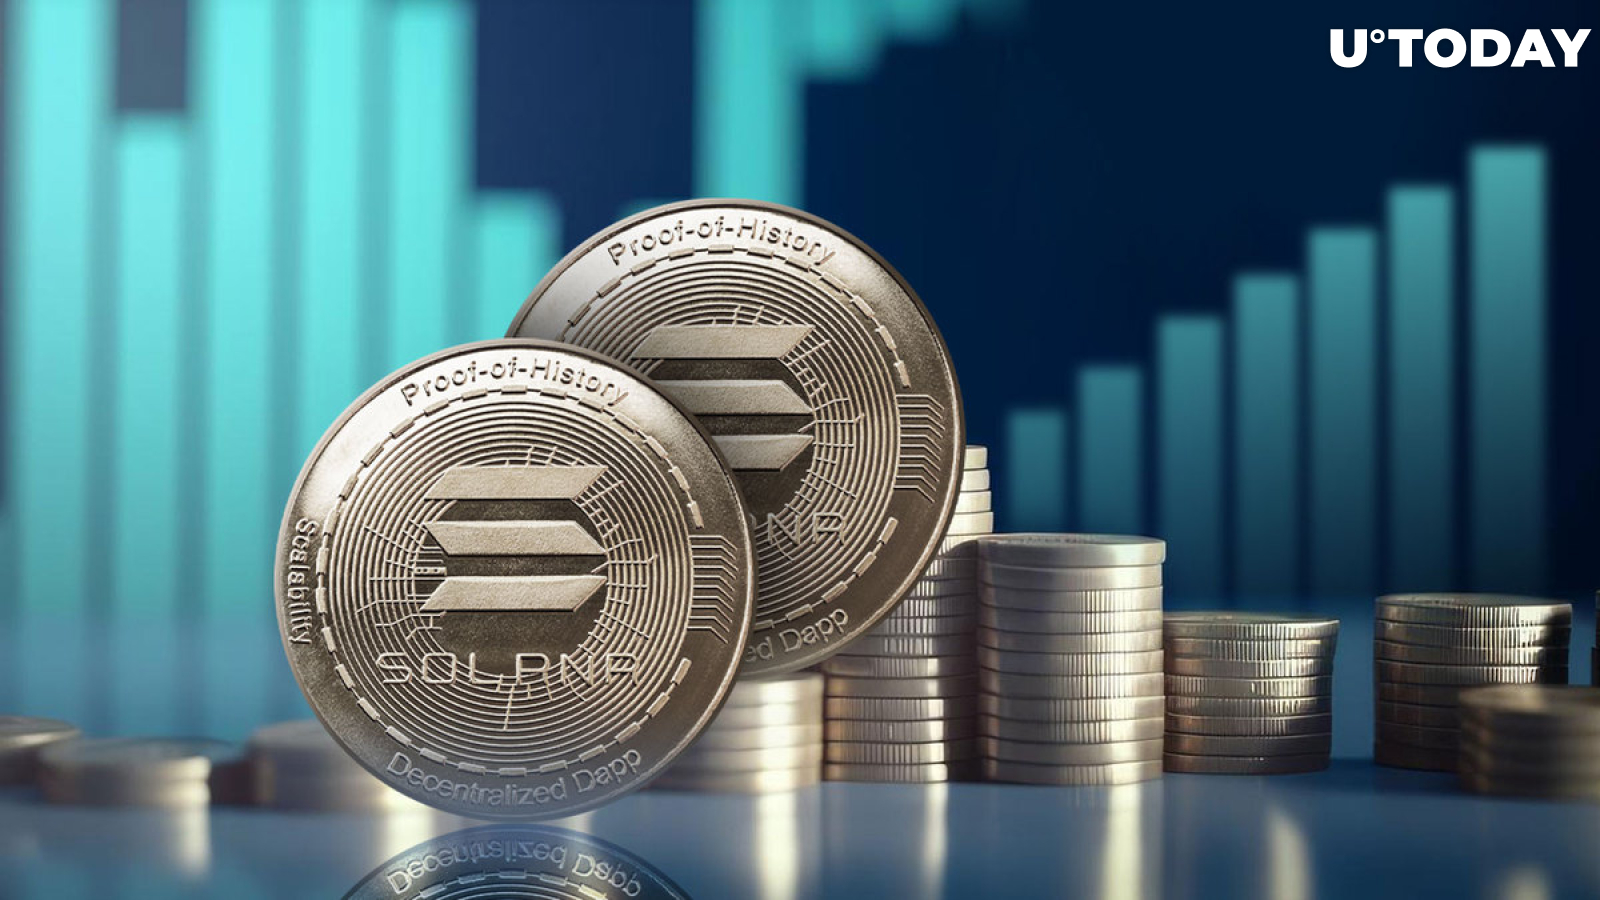 Solana (SOL) Skyrockets by 800%, Surpassing BTC, ETH in Yearly Gains